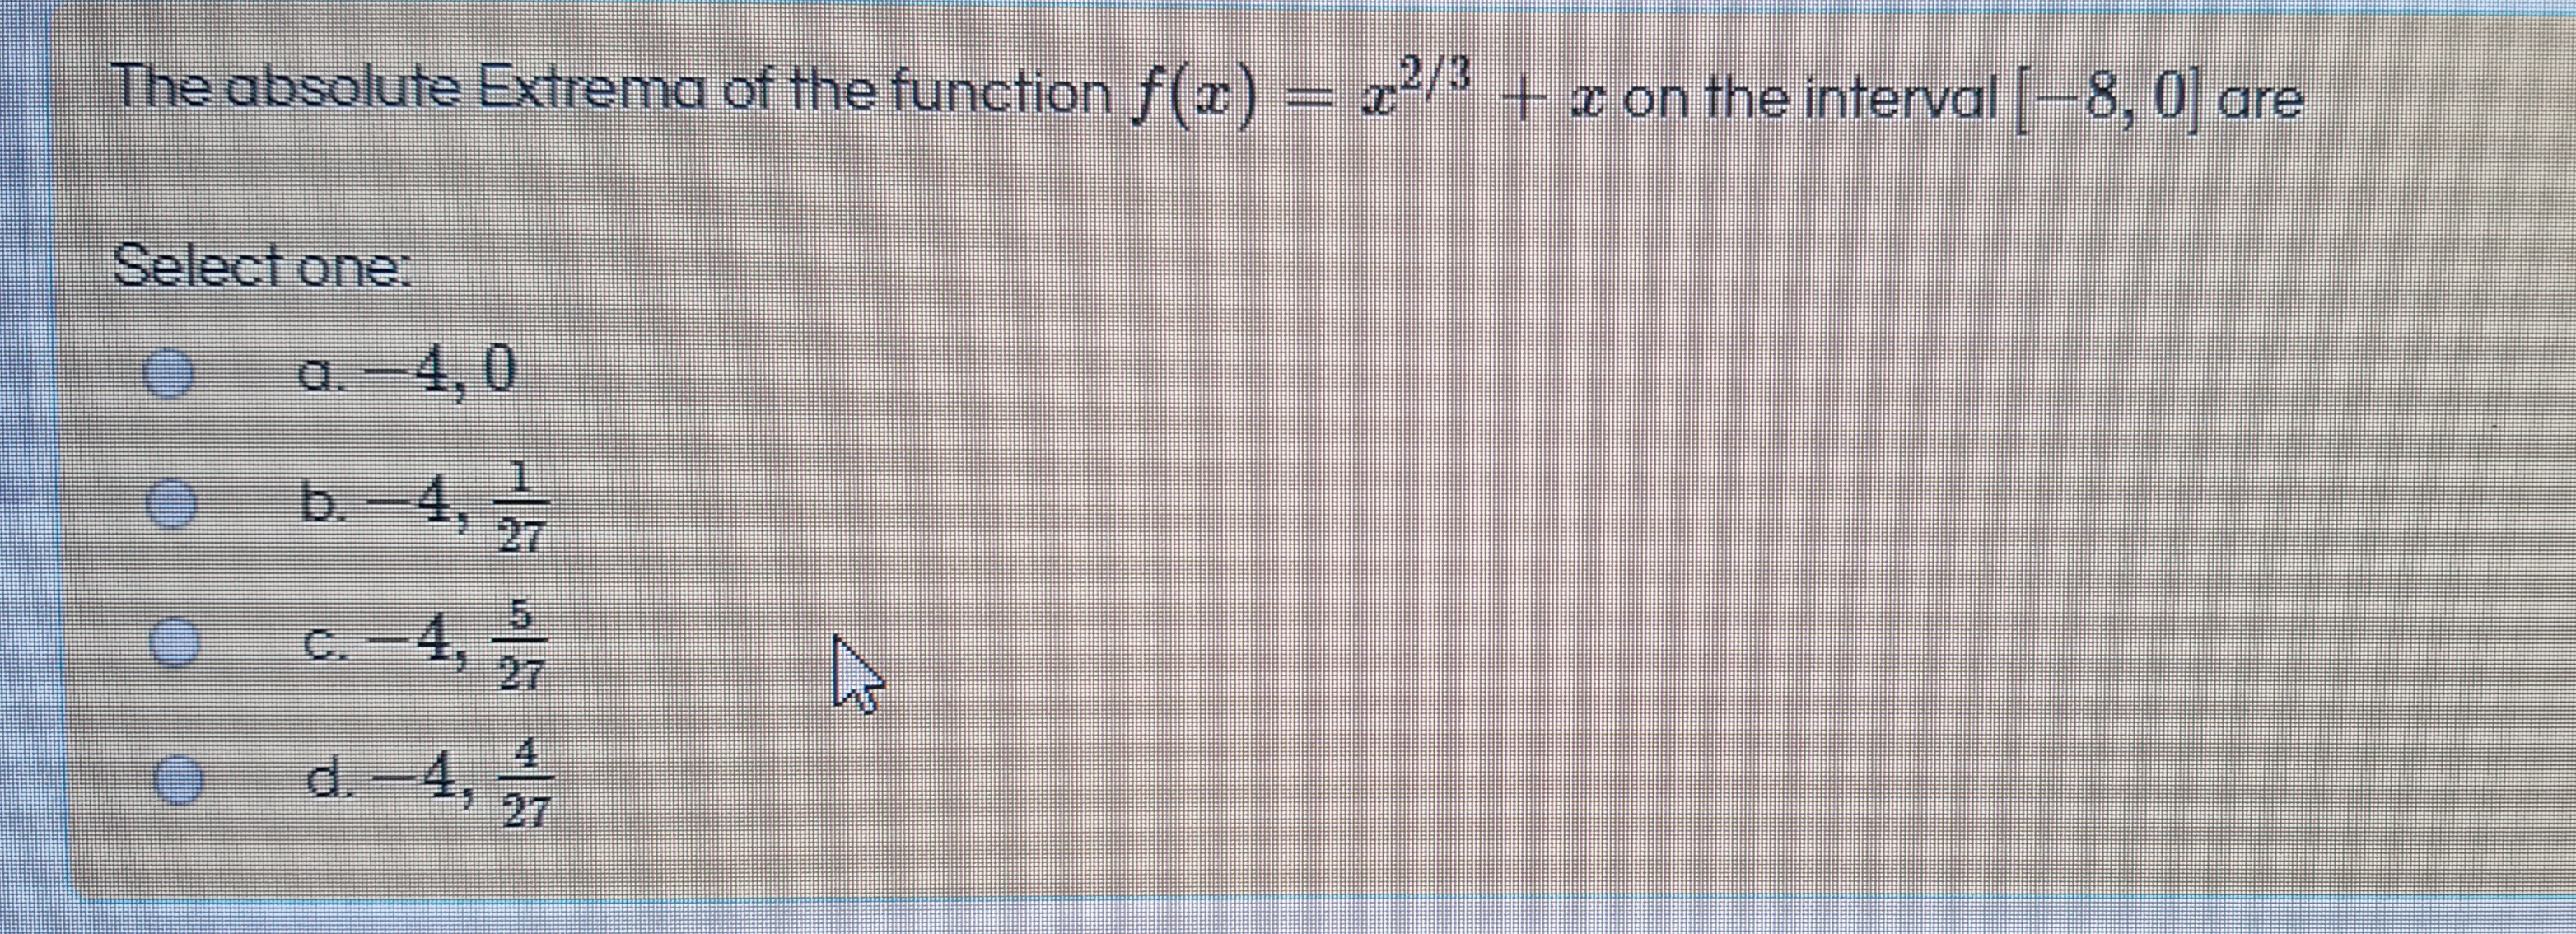 The absolute Extrema of the function f(x) = x* + x on the interval -8, 0 a
